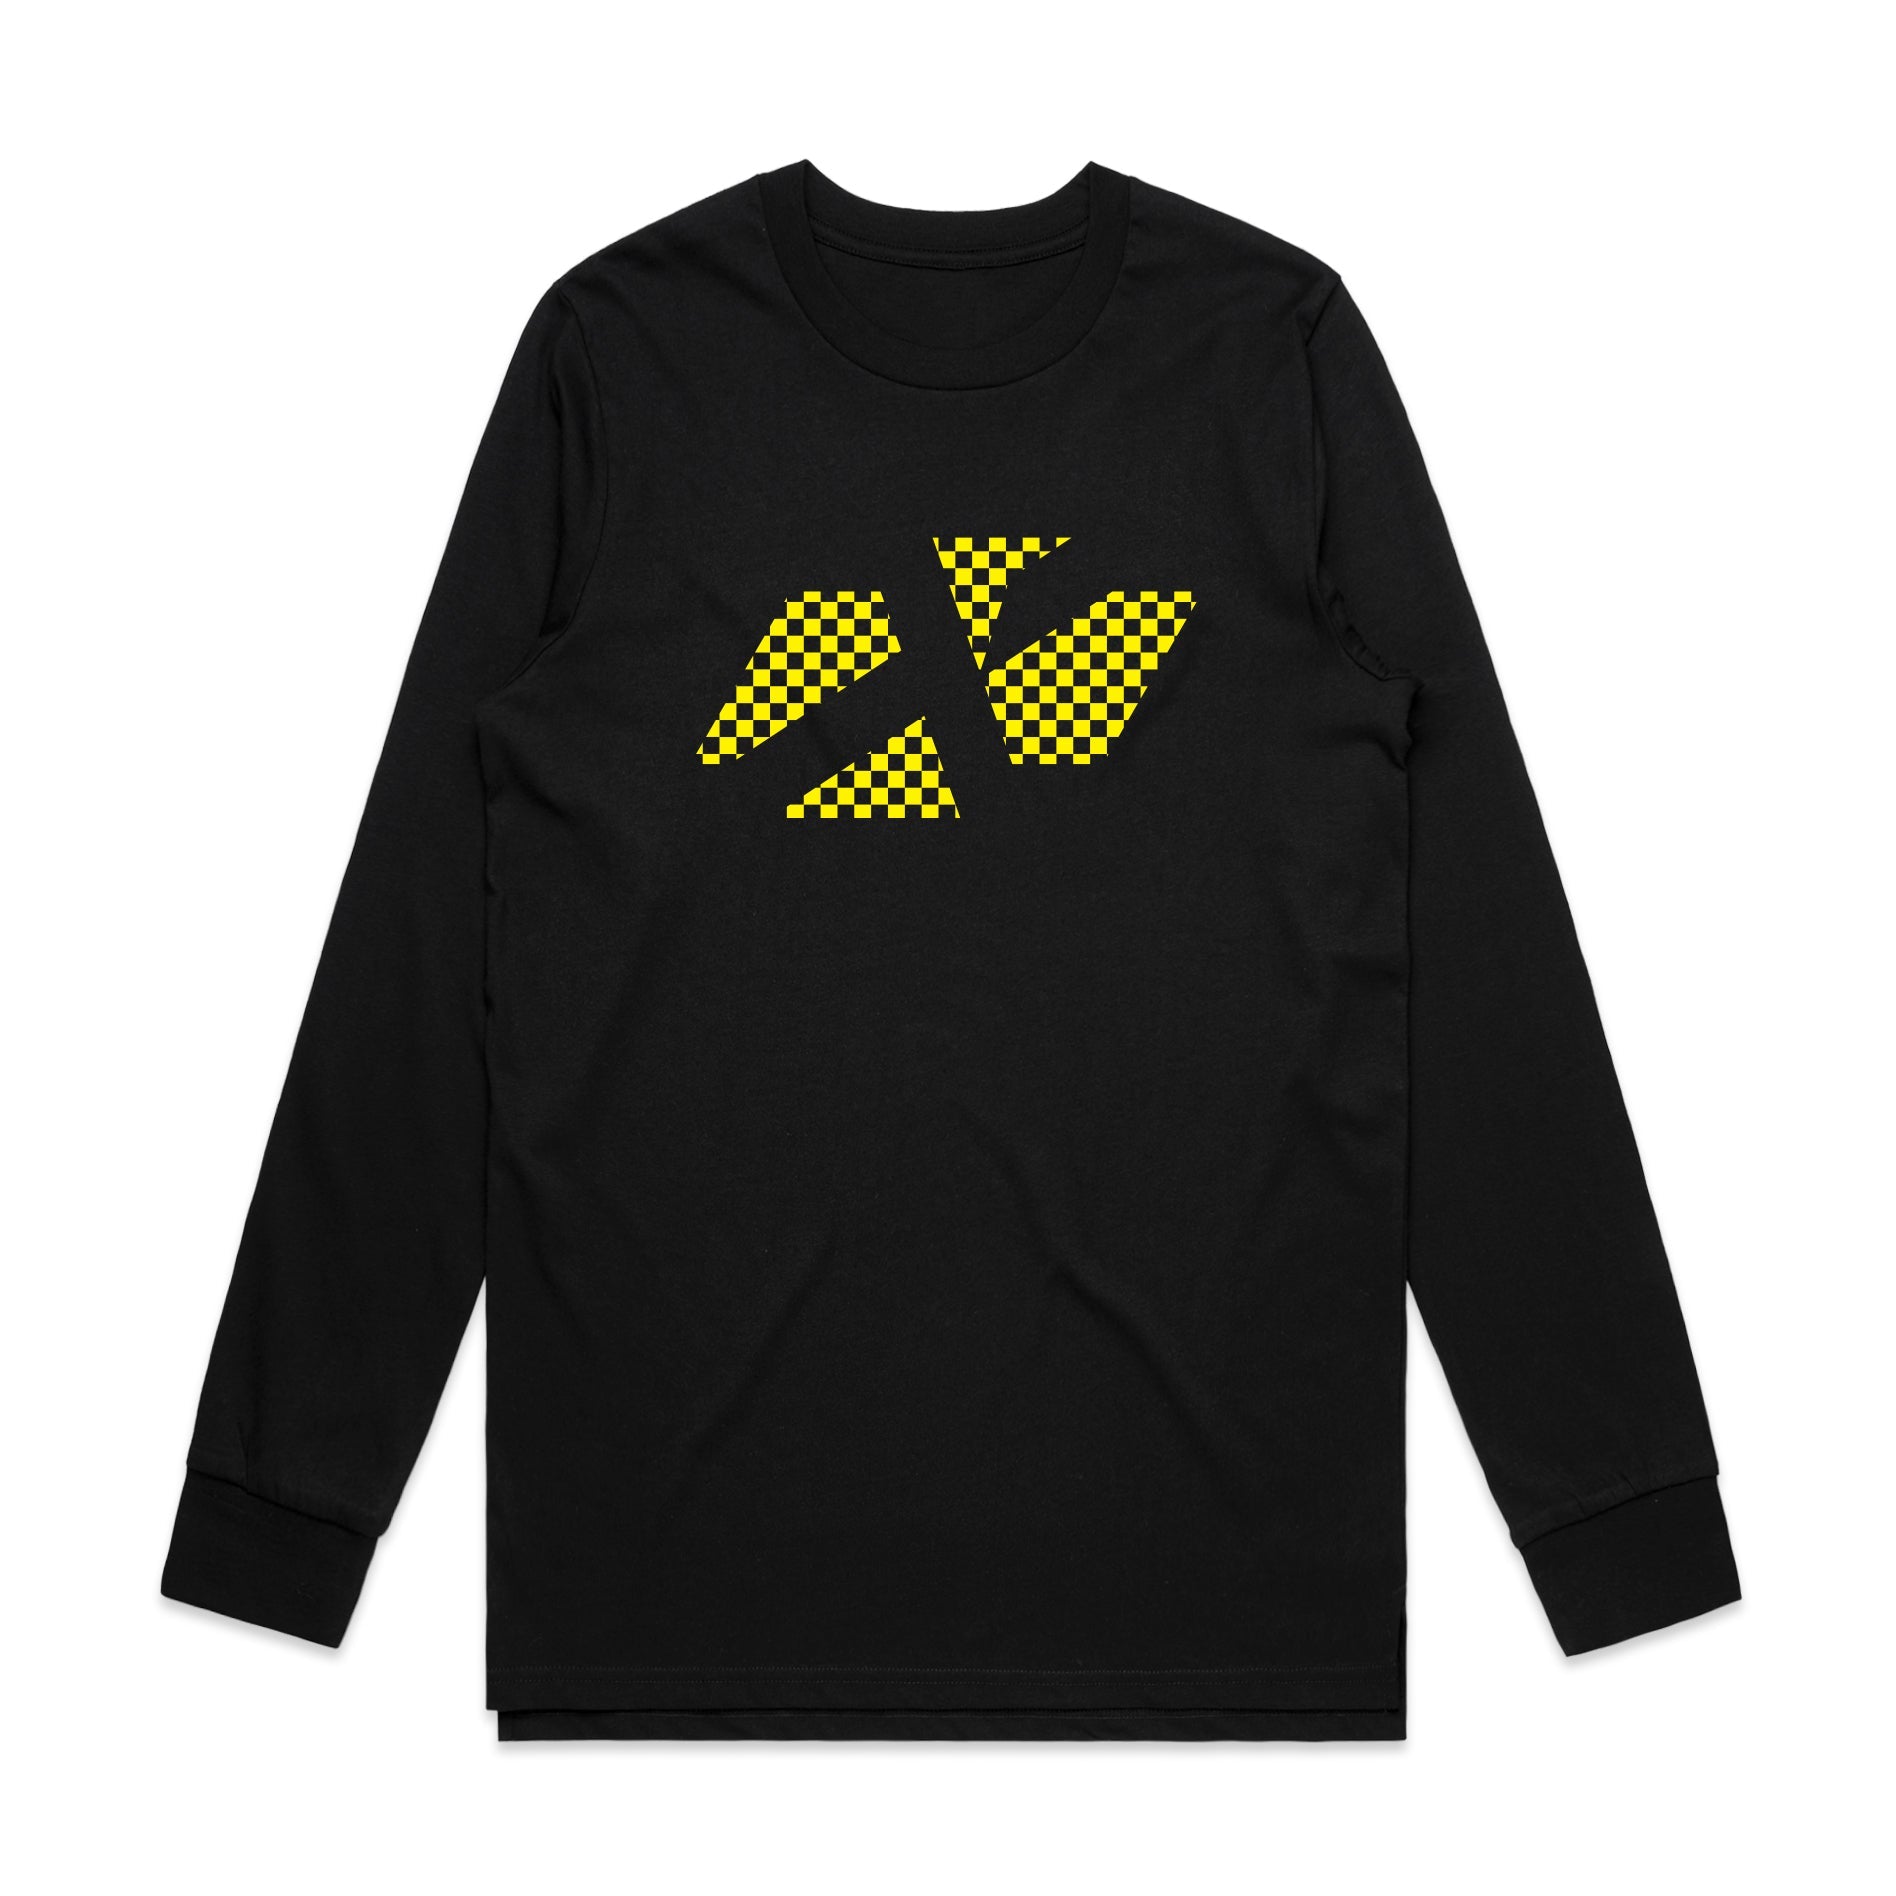 ADULT CROSS ICON CHEQUERED YELLOW LS TEE